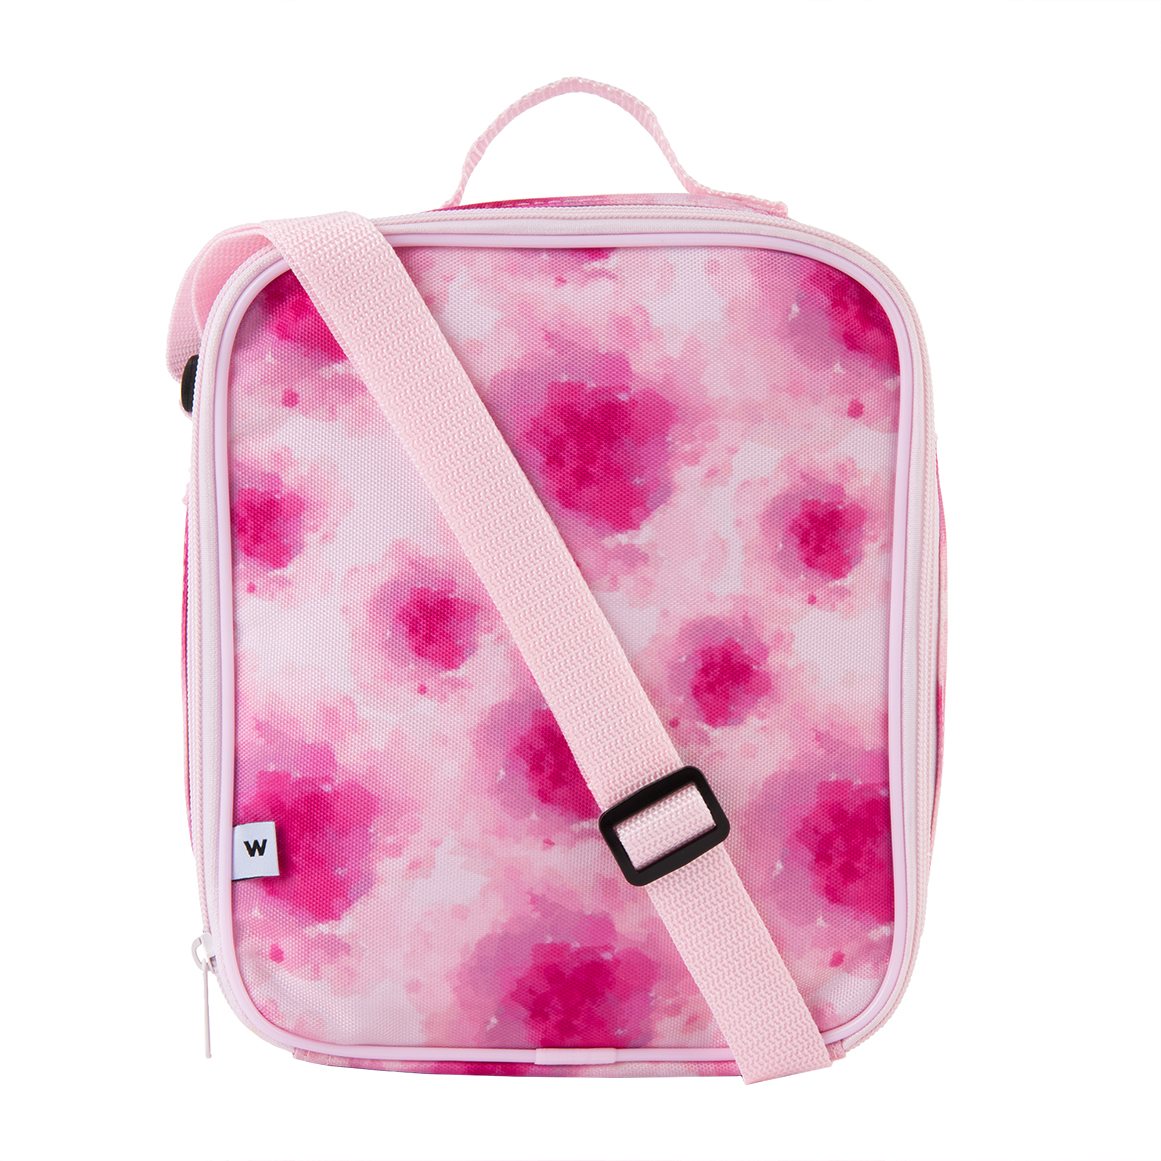 Floral Tie-Dyed Design Lunch Cooler Bag | Woolworths.co.za